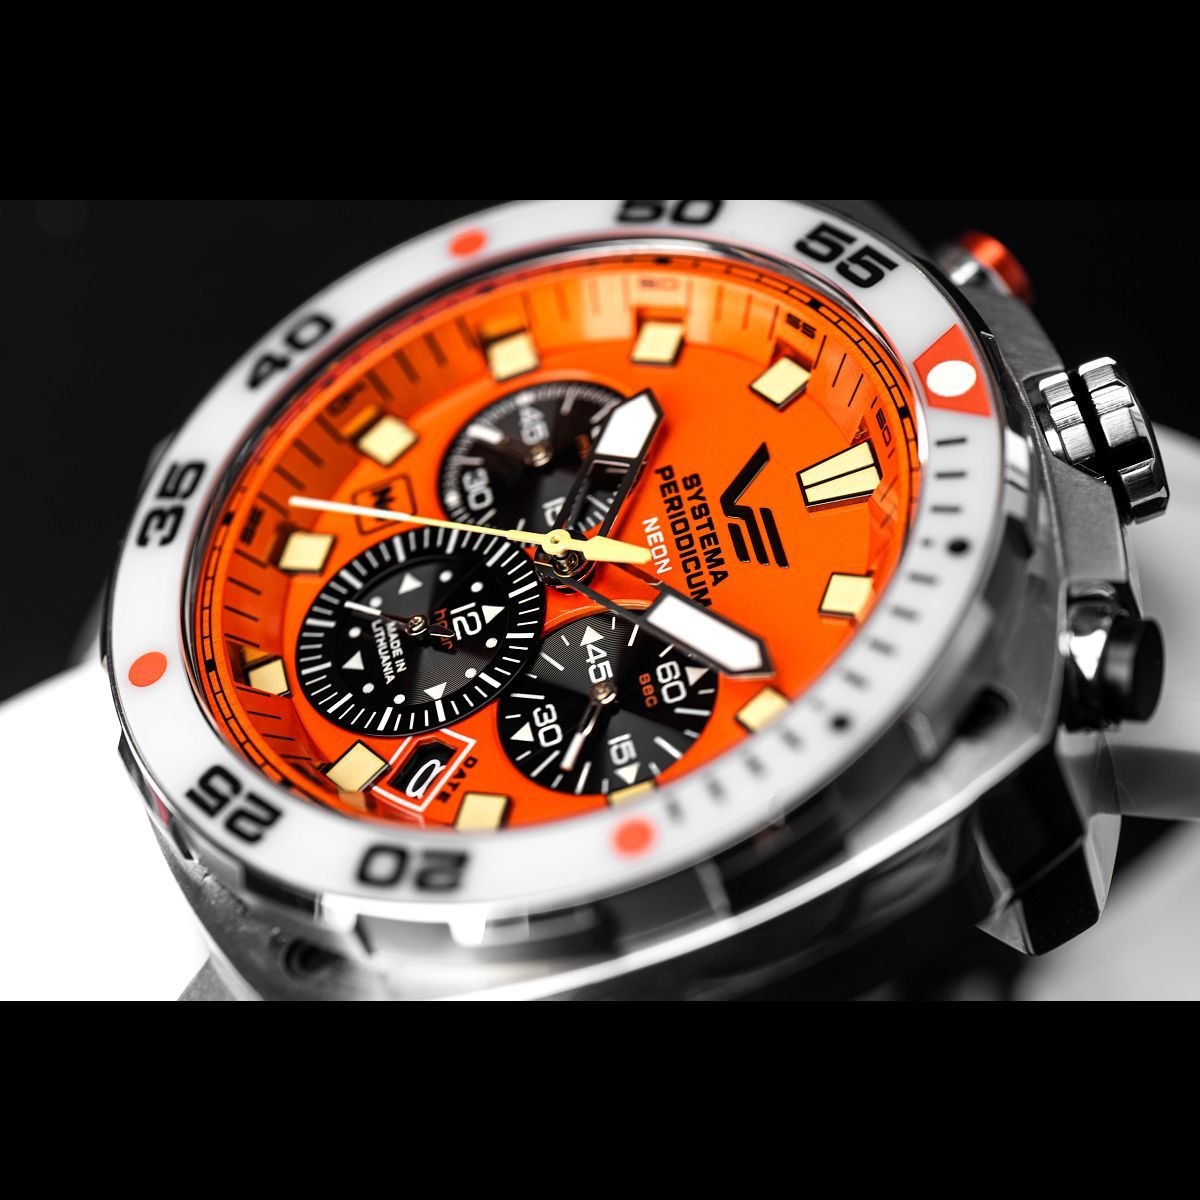 Vostok Europe System Periodicum Neon Chronograph SET Limited Edition gents watch